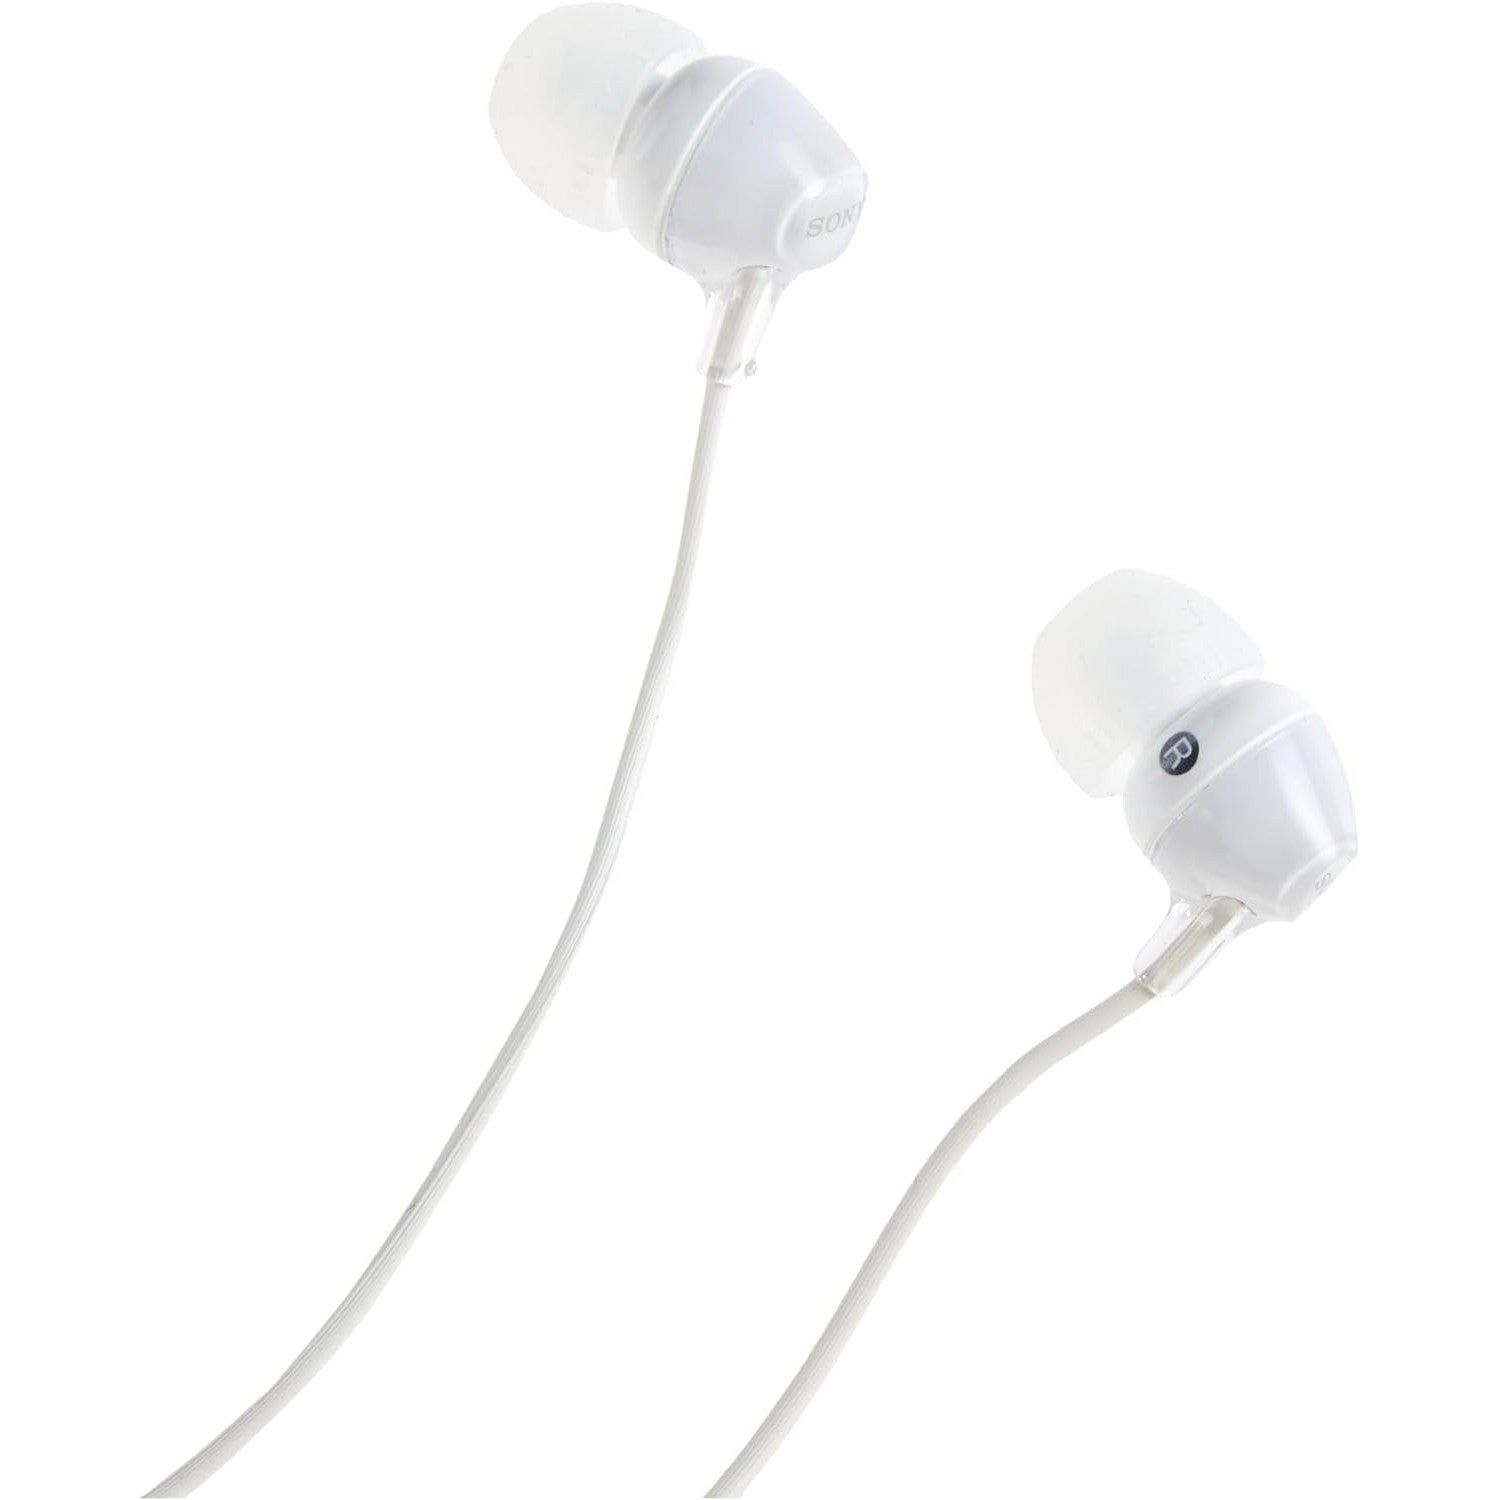 Sony MDR-EX15APWZ(CE7) Earphones with Smartphone Mic and Control - White